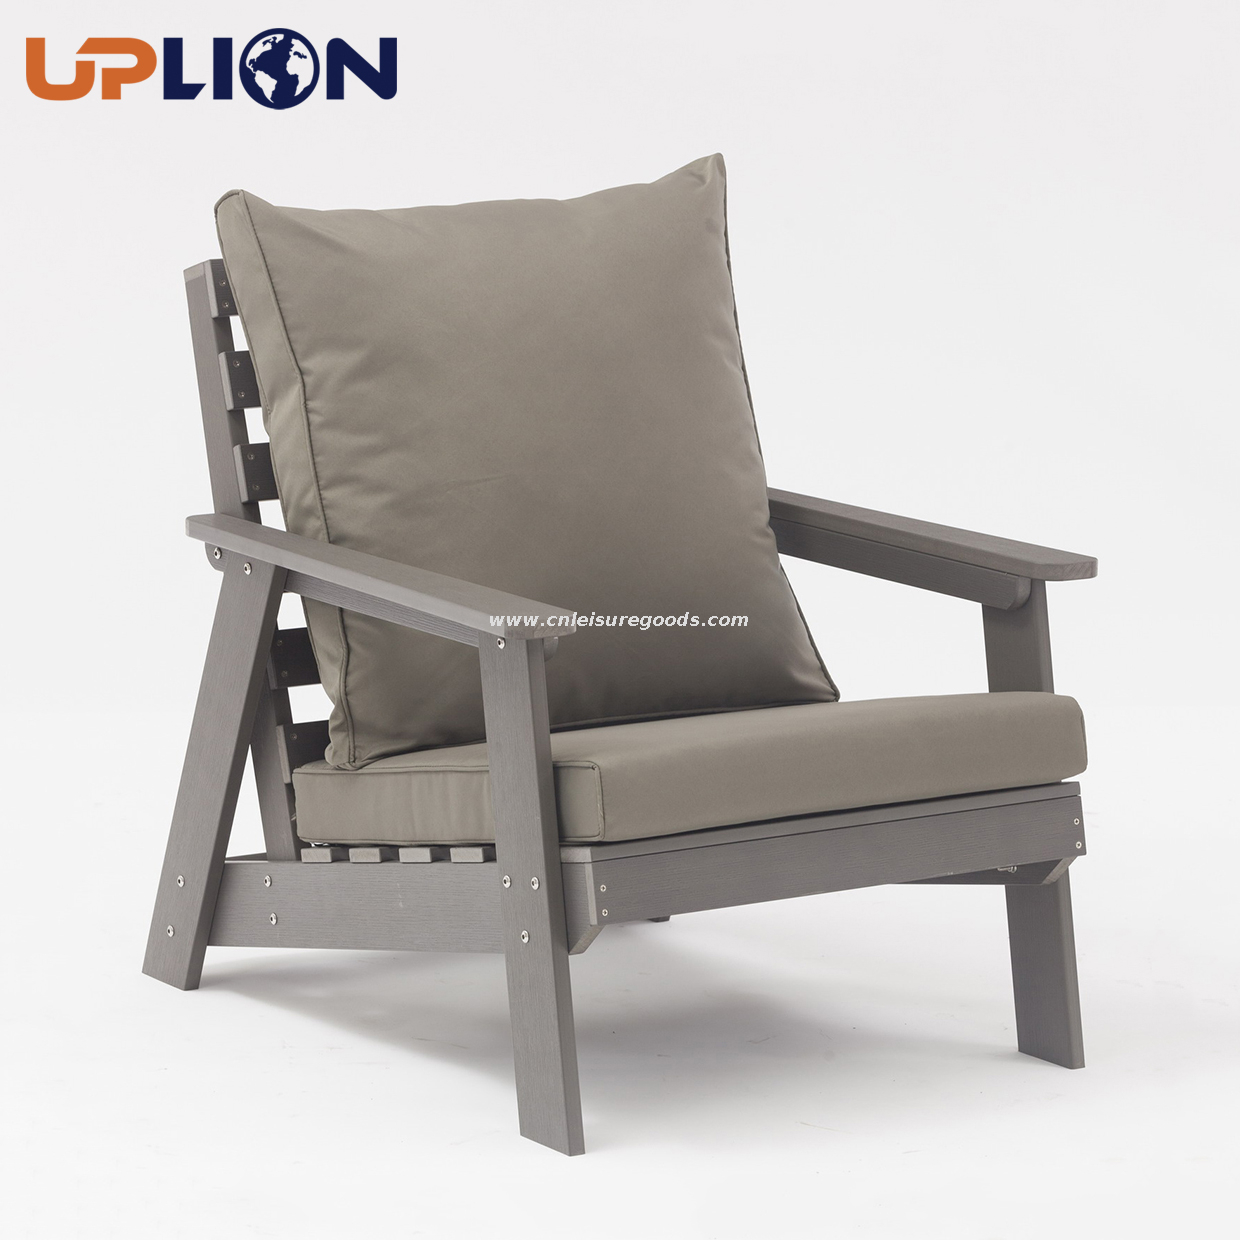 Uplion Garden Furniture KD Structure Waterproof Chair with Cushion Plastic Wood Coffee Dining Chair